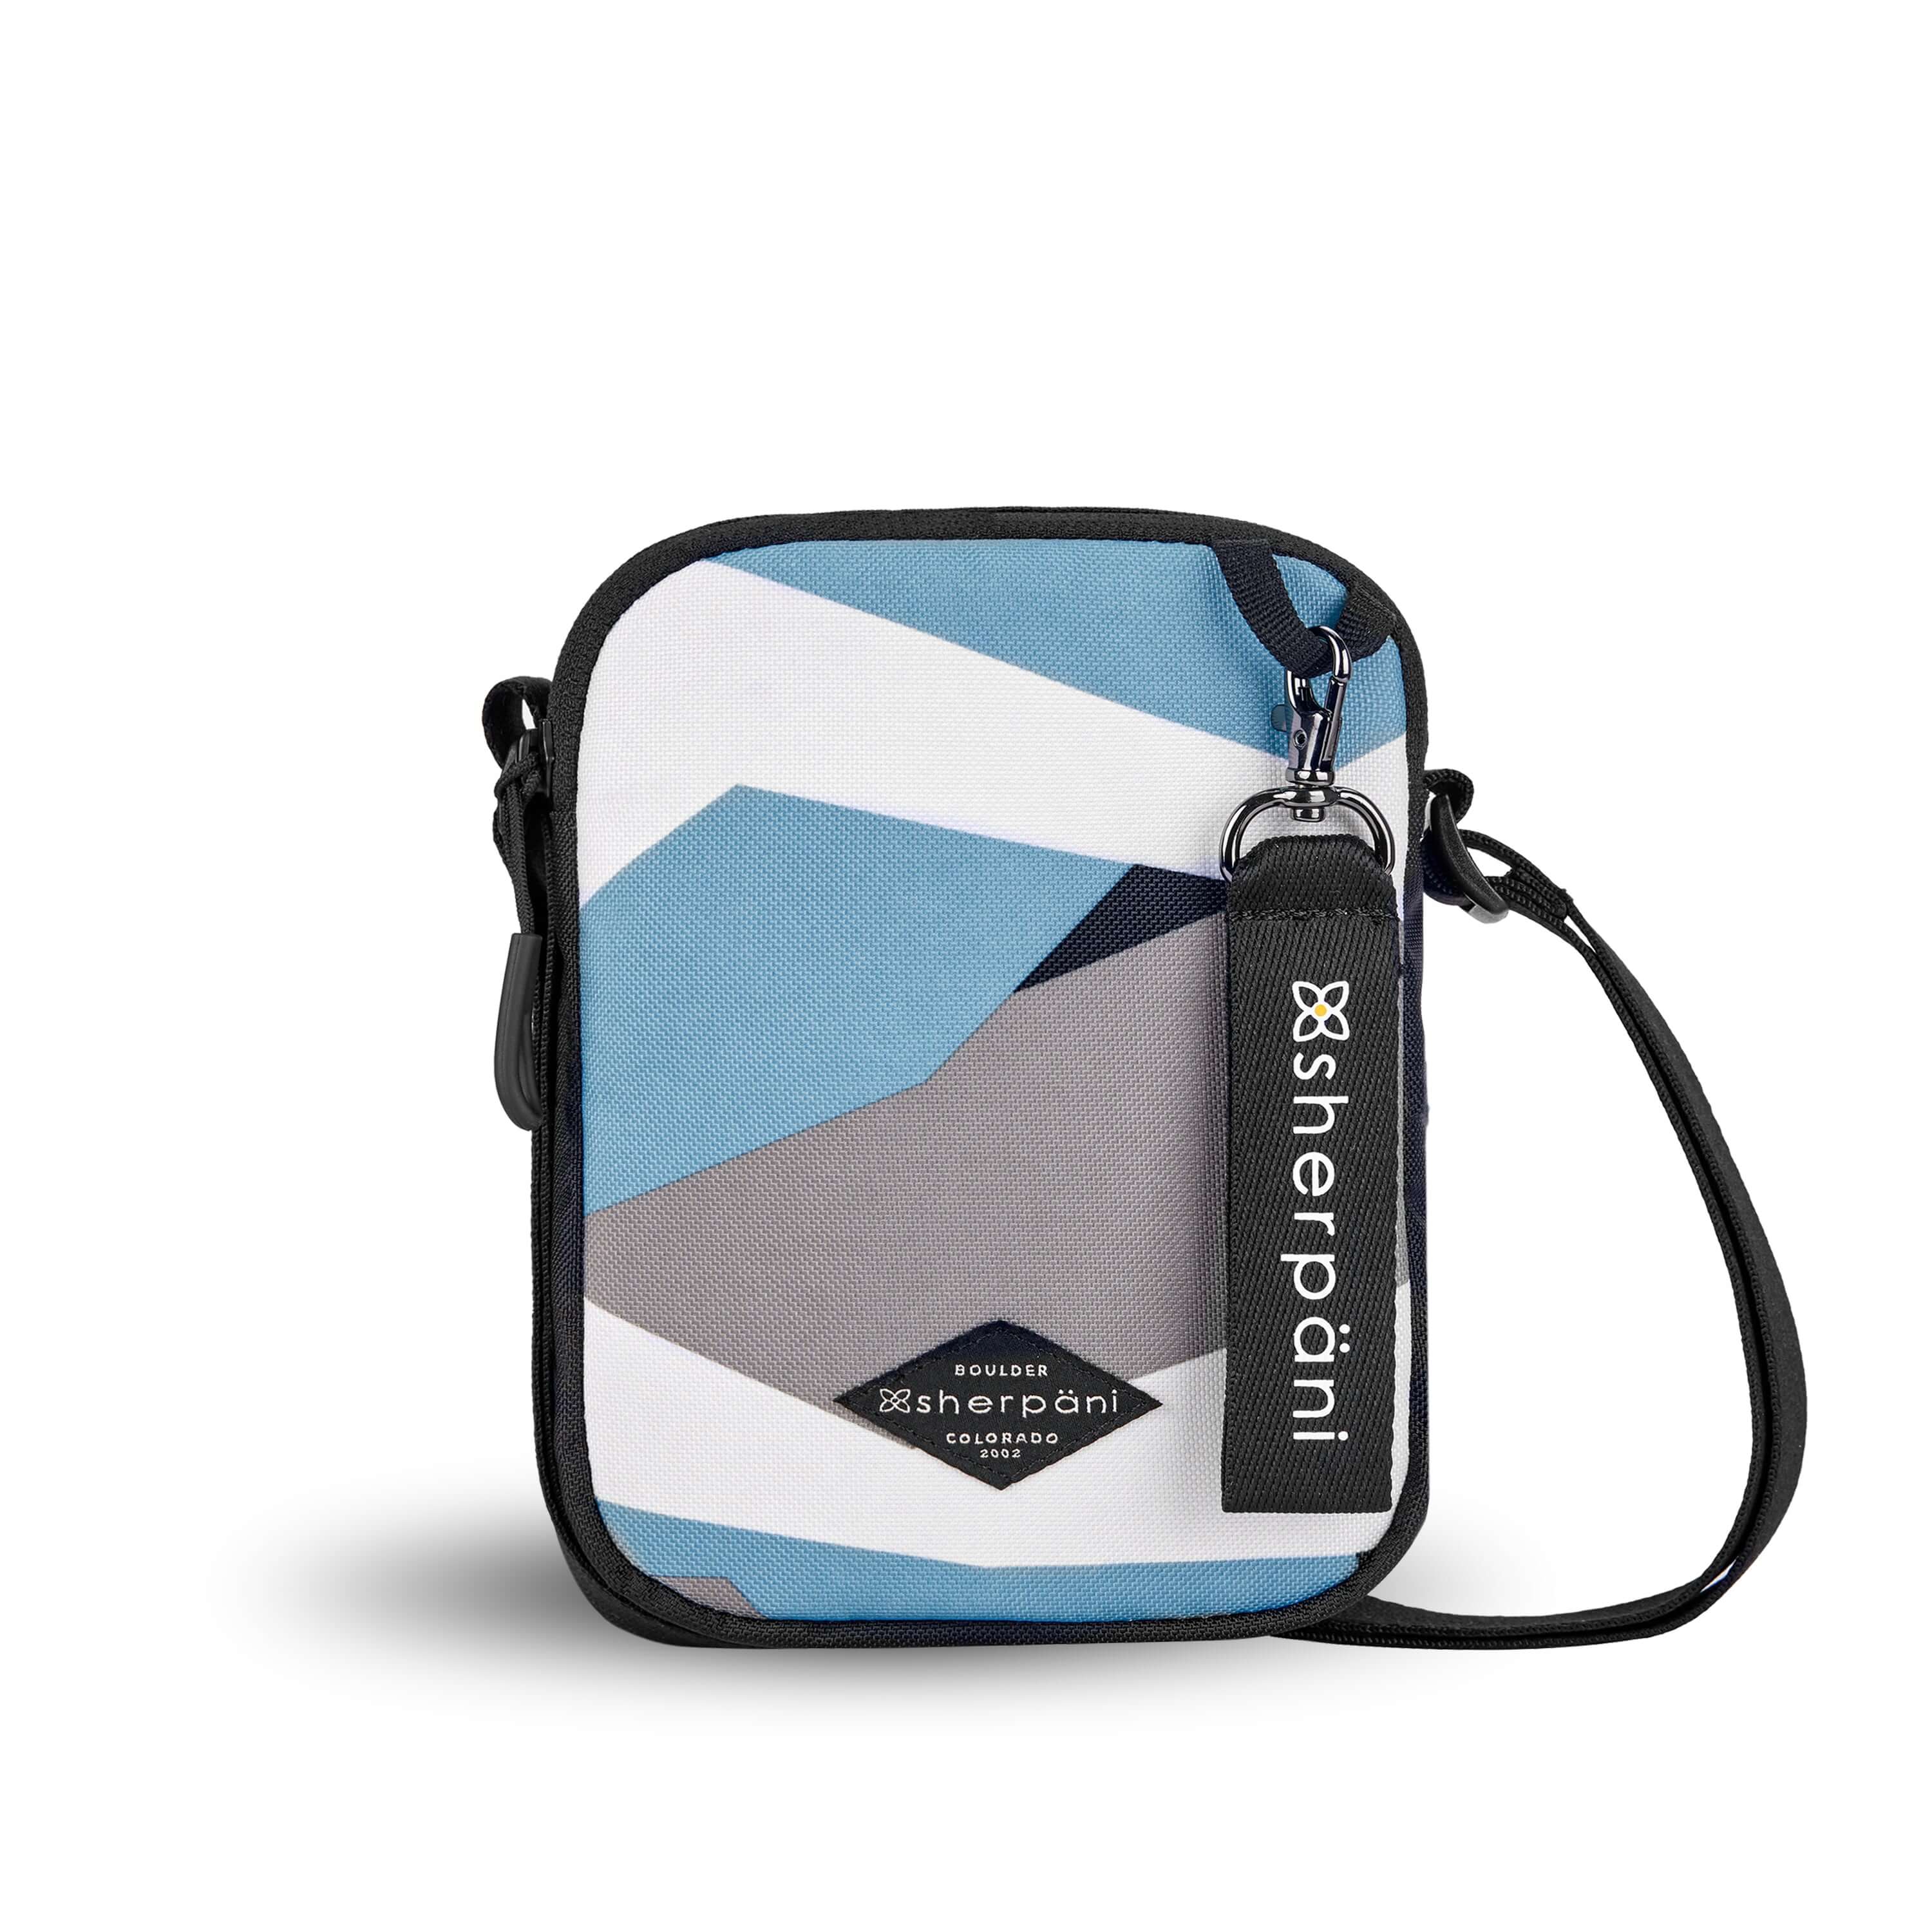 Flat front view of Sherpani crossbody, the Rogue in Summer Camo. The bag is two toned: the front is a camouflage pattern of light blue, gray and white, the back is black. The main zipper compartment features an easy pull zipper accented in black. The bag has an adjustable crossbody strap. A branded Sherpani keychain is clipped to a fabric loop on the top right corner. 